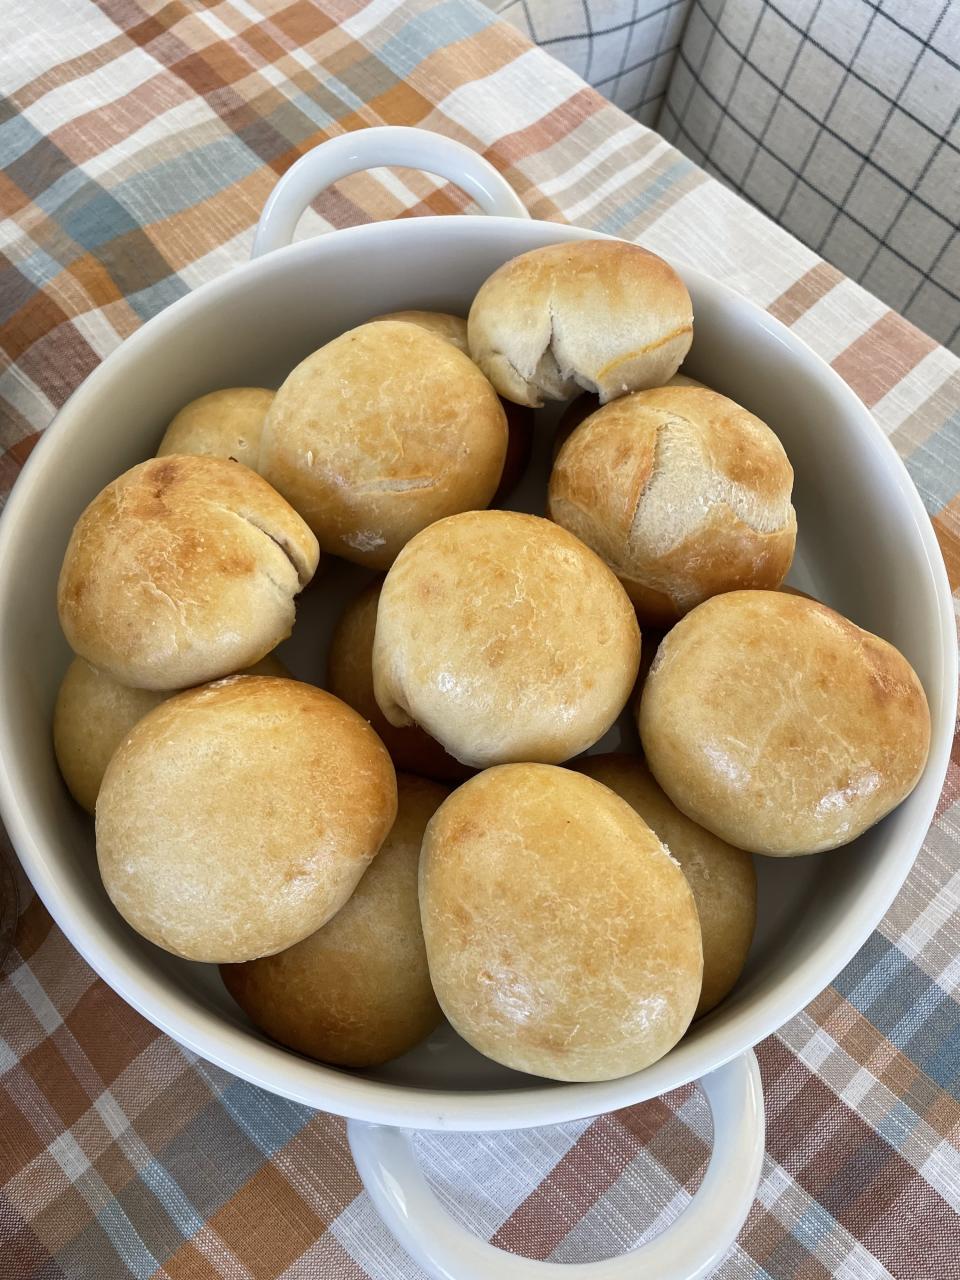 Once I ate one I realized that 1) maybe I had messed up somewhere and/or 2) this recipe wasn't very good. I thought the rolls were actually very dense. Not quite that light and fluffy result I was hoping for to help soak up my gravy. Still, it was on to the next.